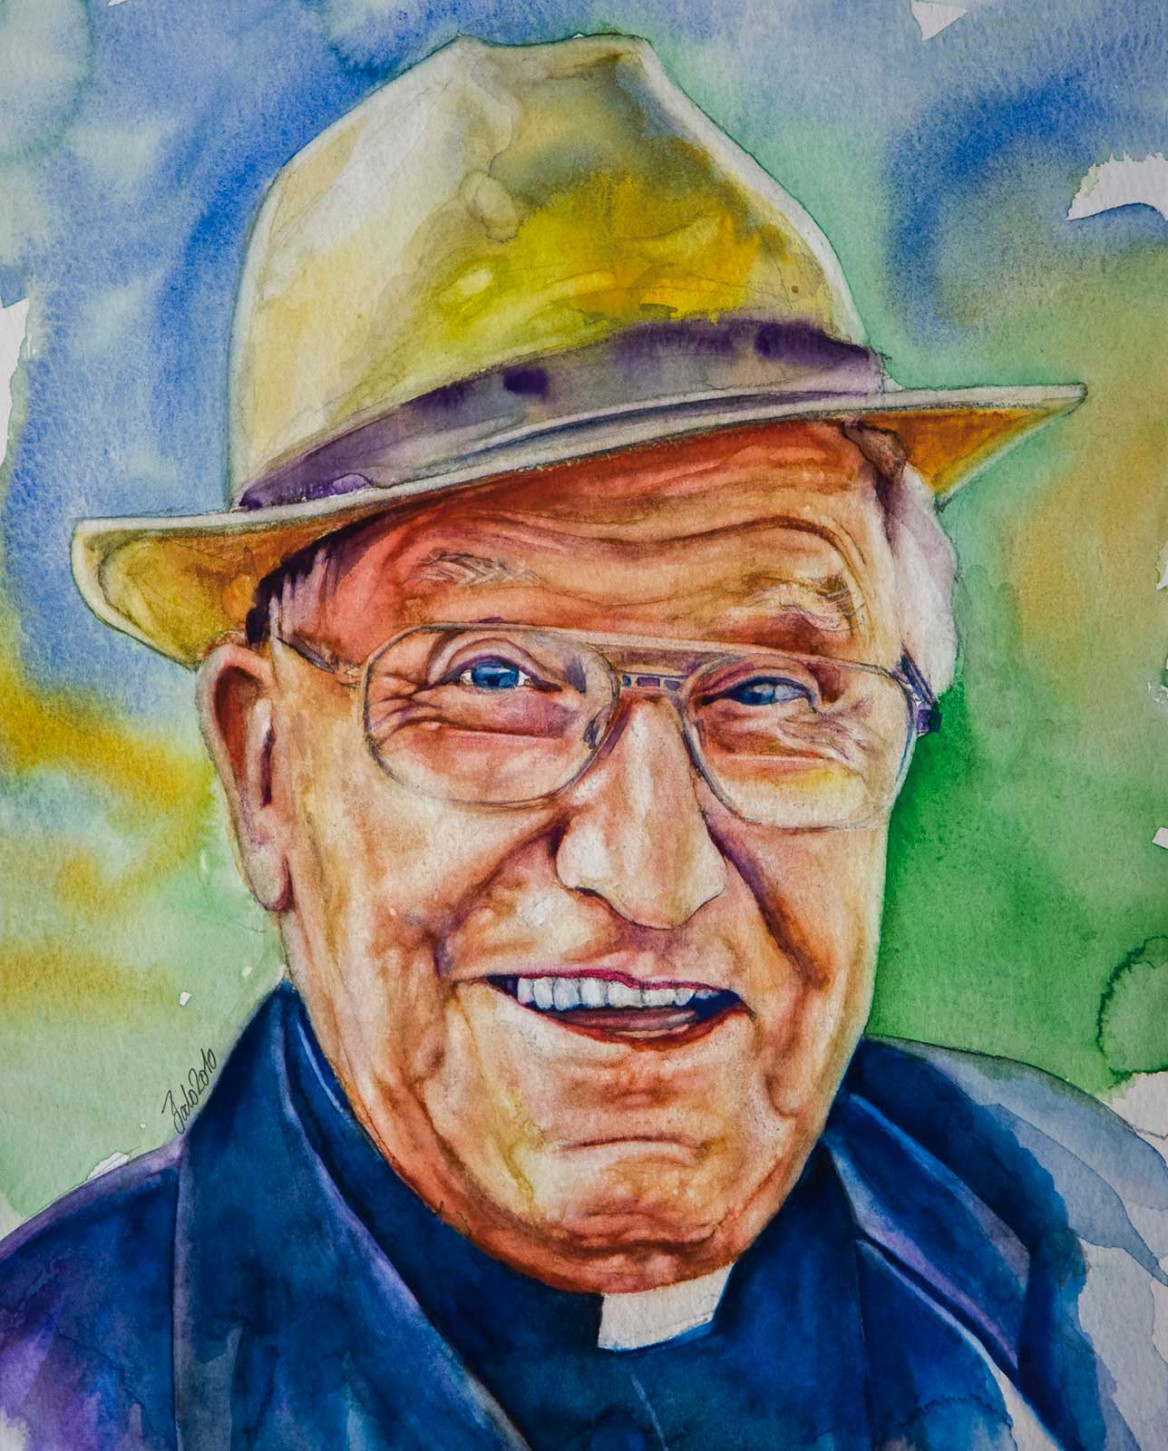 Colorful portrait of Anton with hat painted in watercolors Farbenfrohes Porträt von Pfarrer Anton in Aquarell